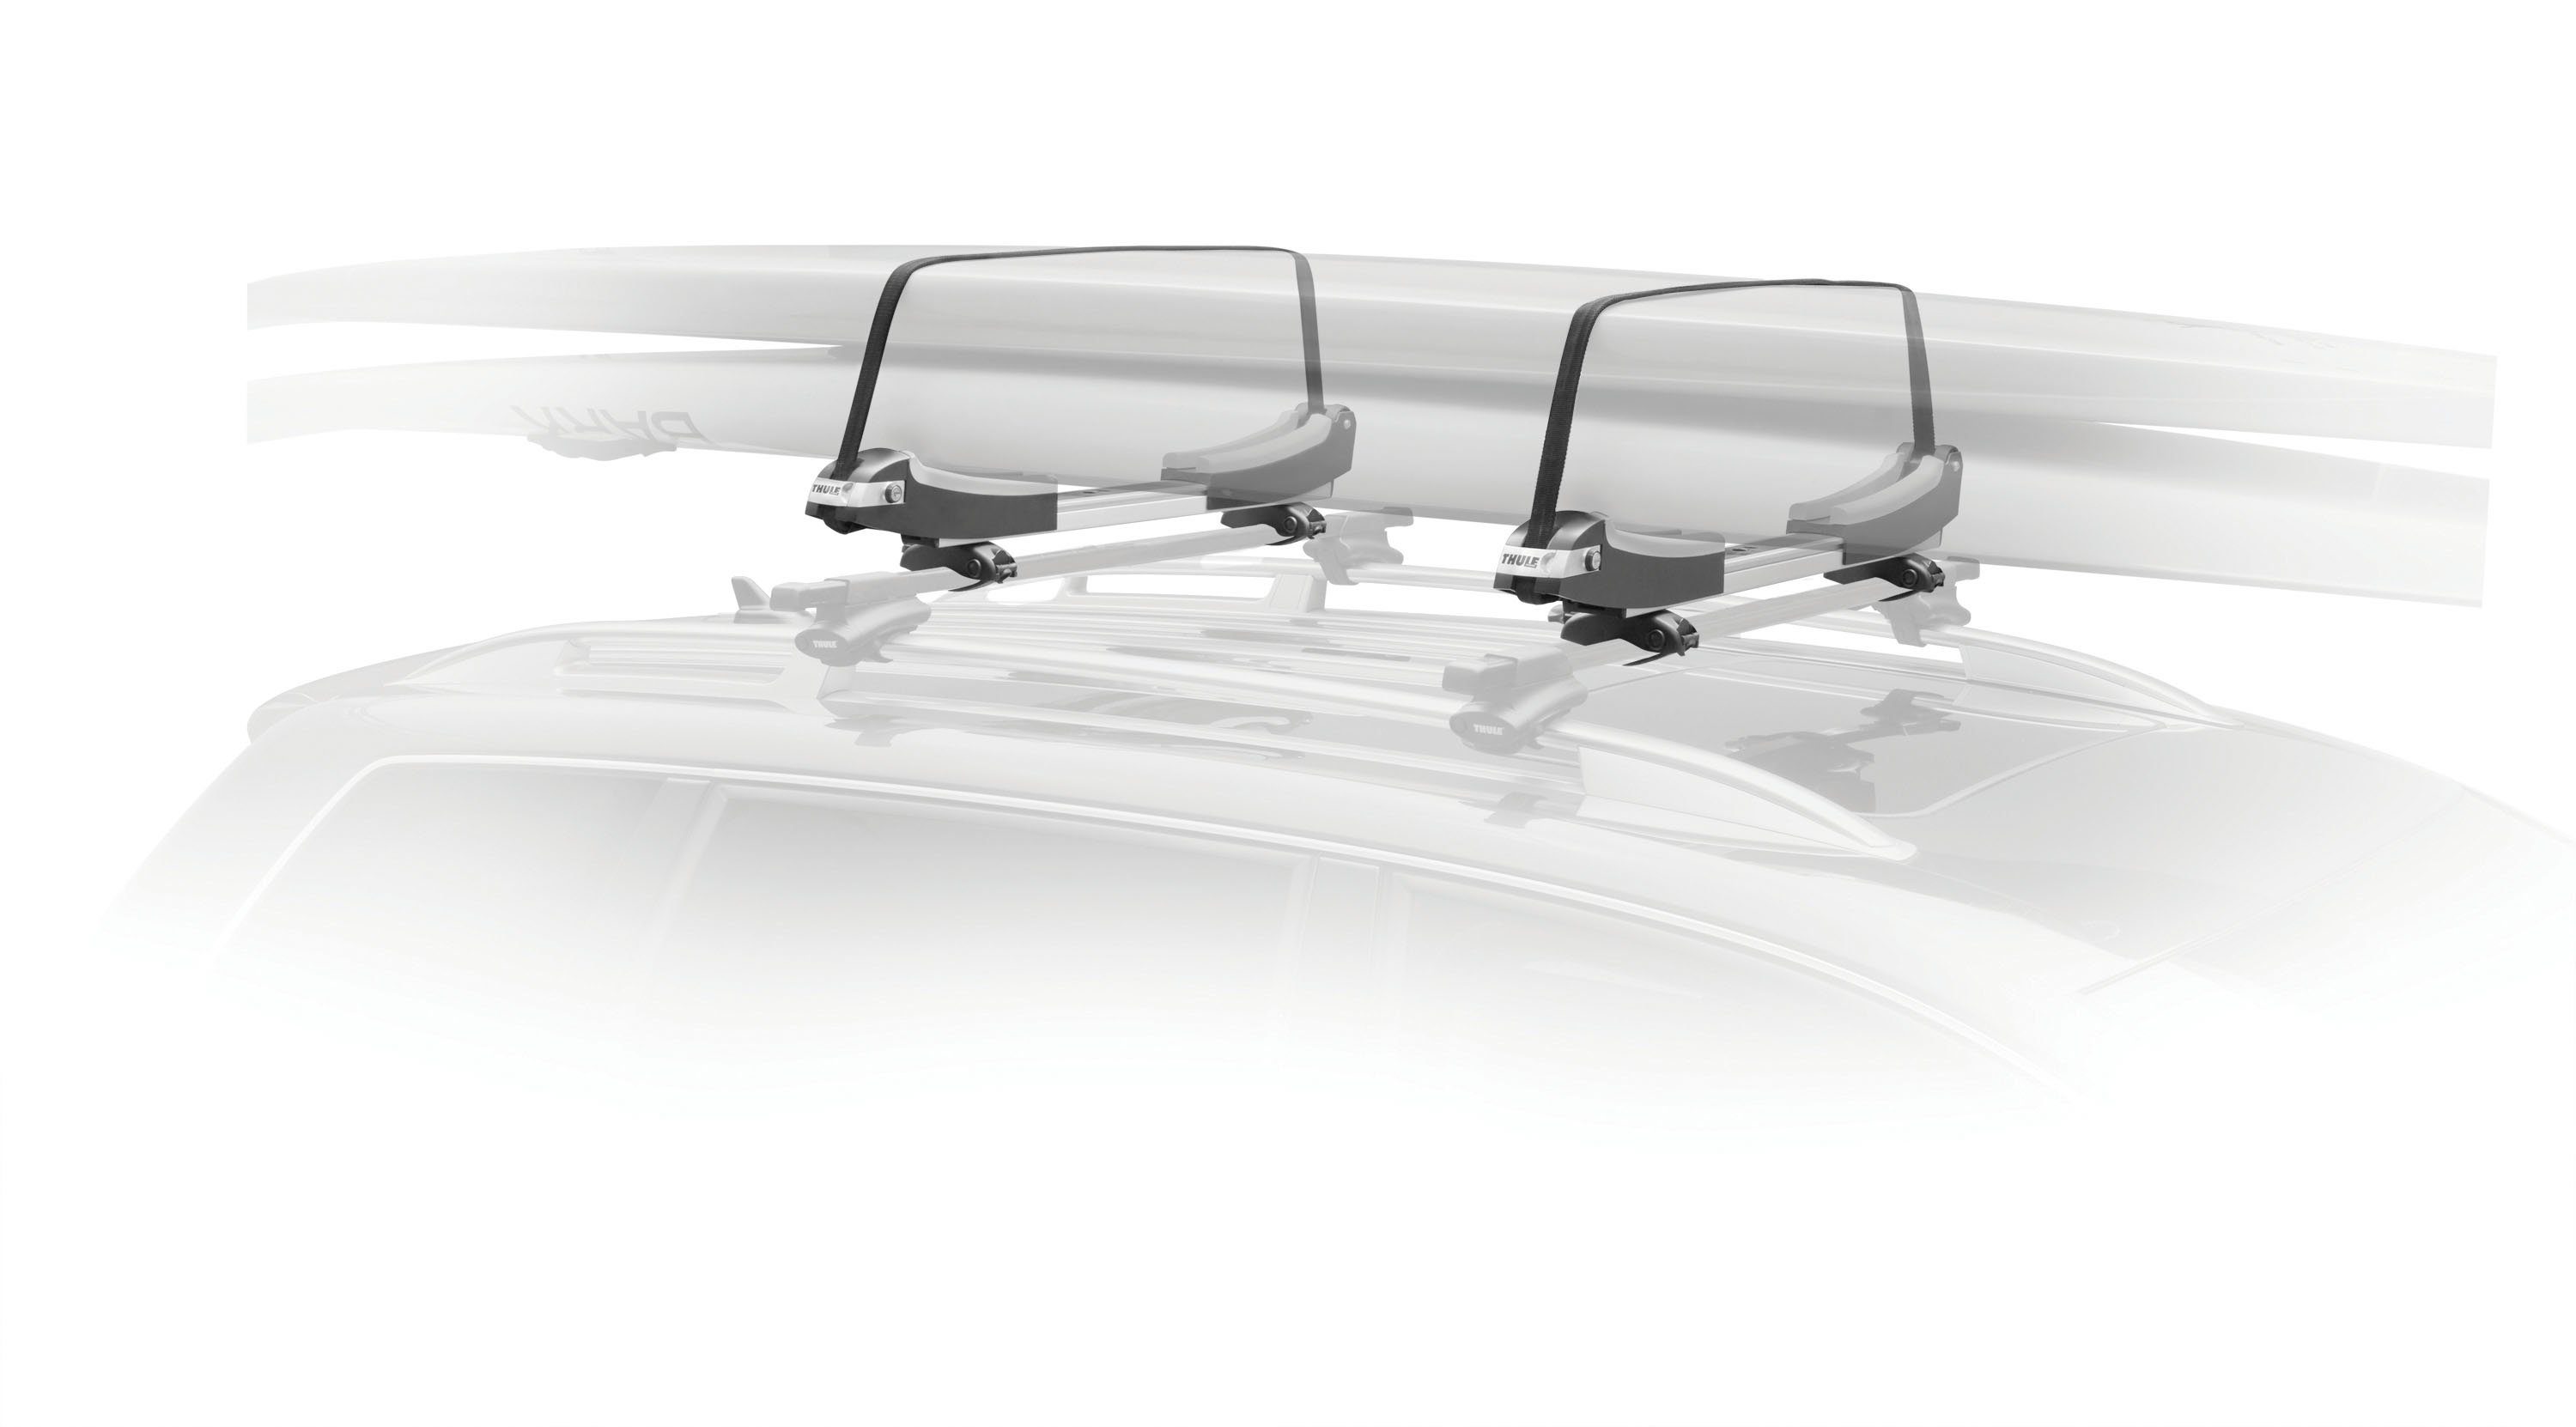 Thule Dachträger SUP für SUP-Boards XT, Taxi